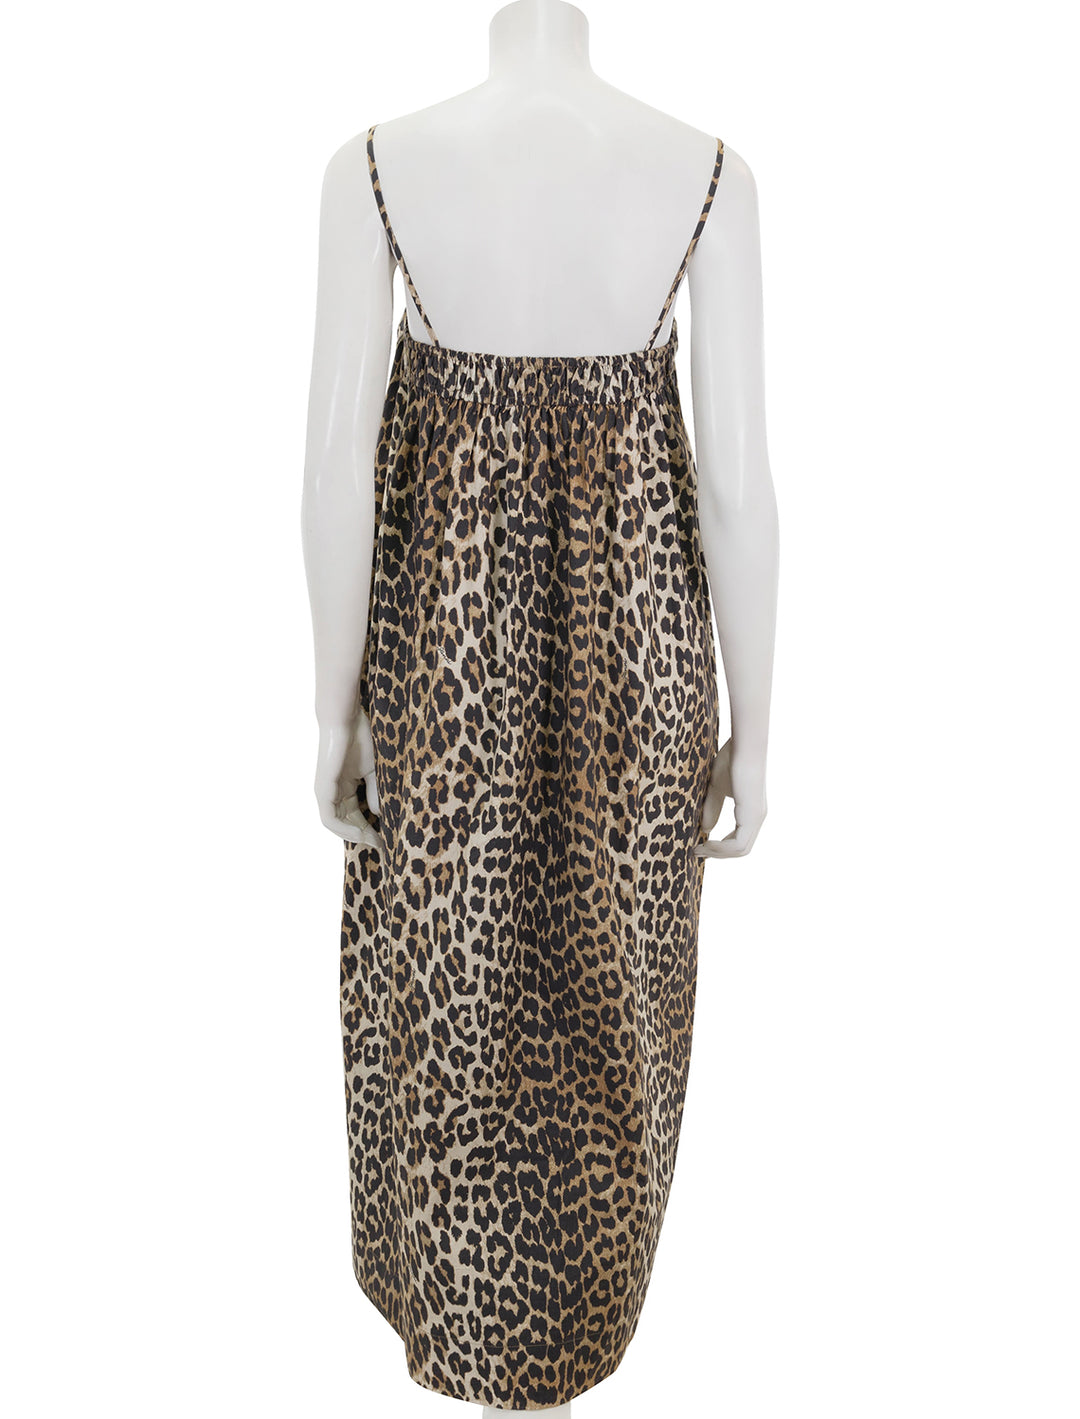 Back view of GANNI's printed cotton midi dress in leopard.